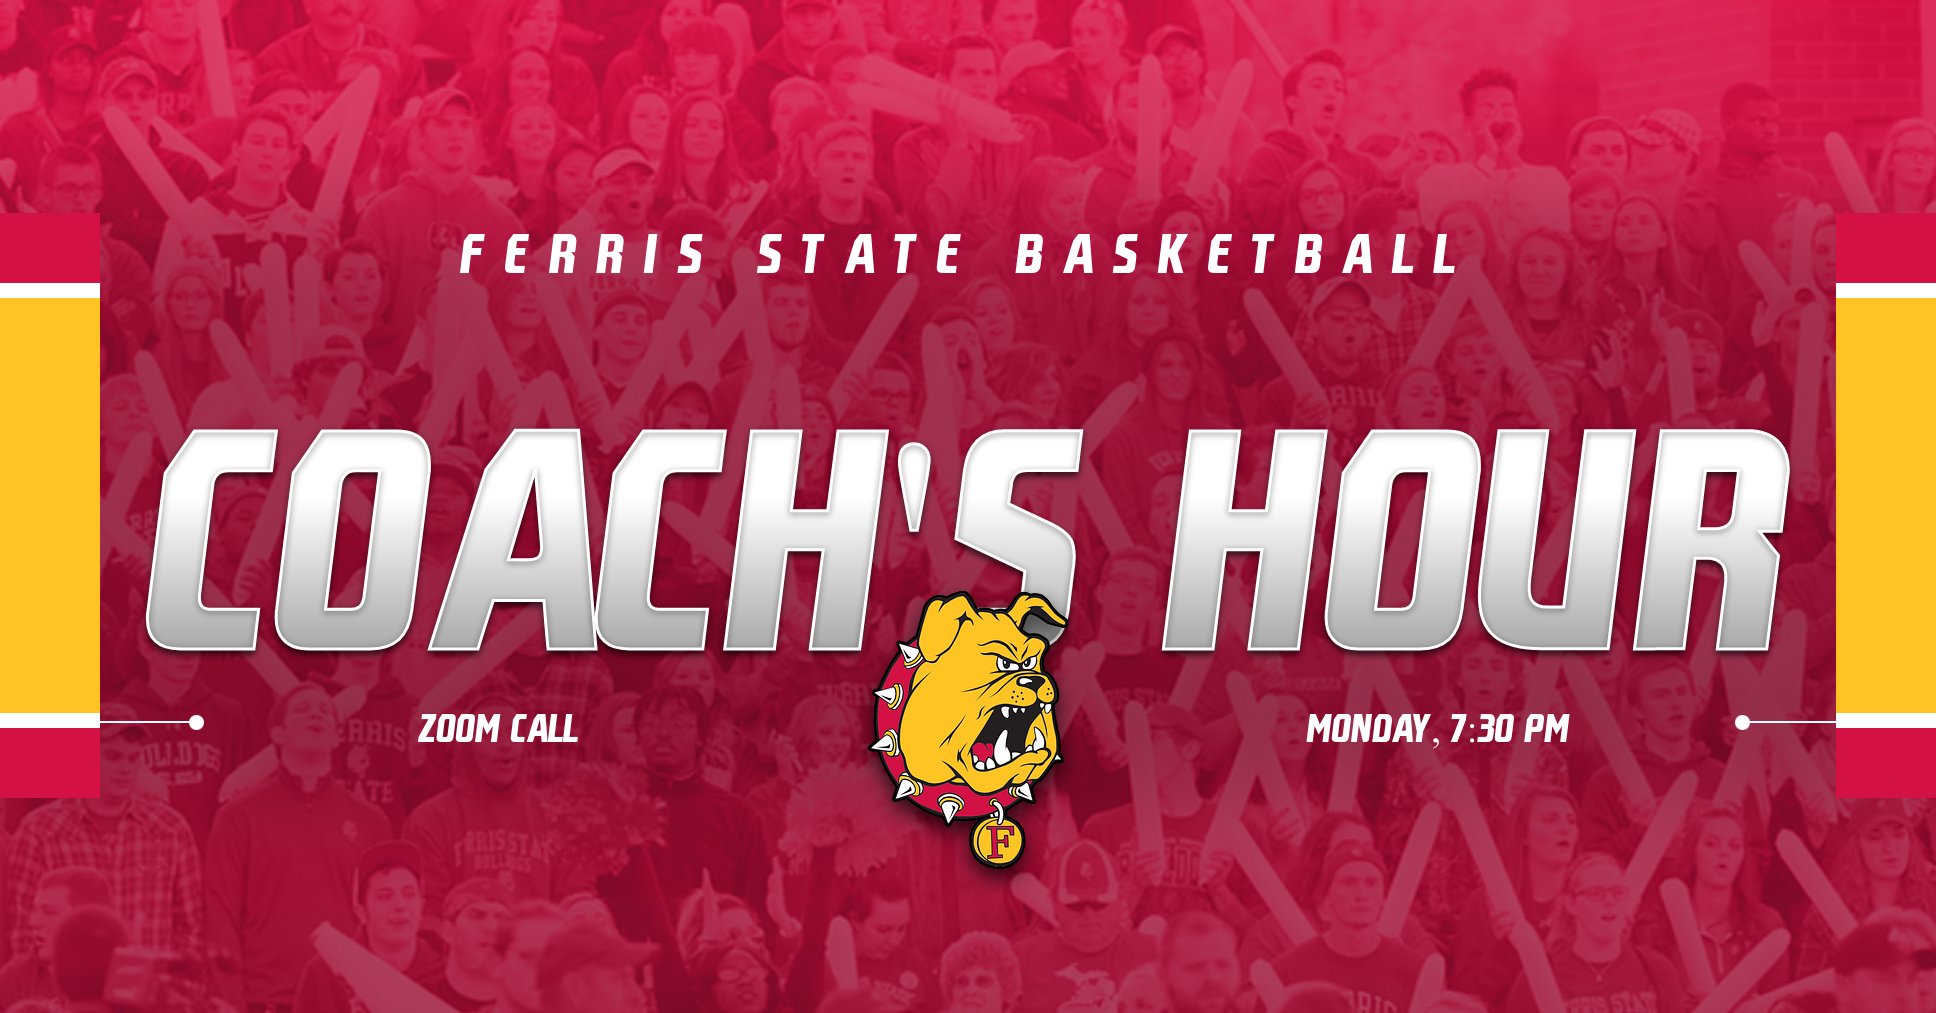 Ferris State Men's Basketball To Hold "Coach's Hour" Zoom Call On Monday Evening